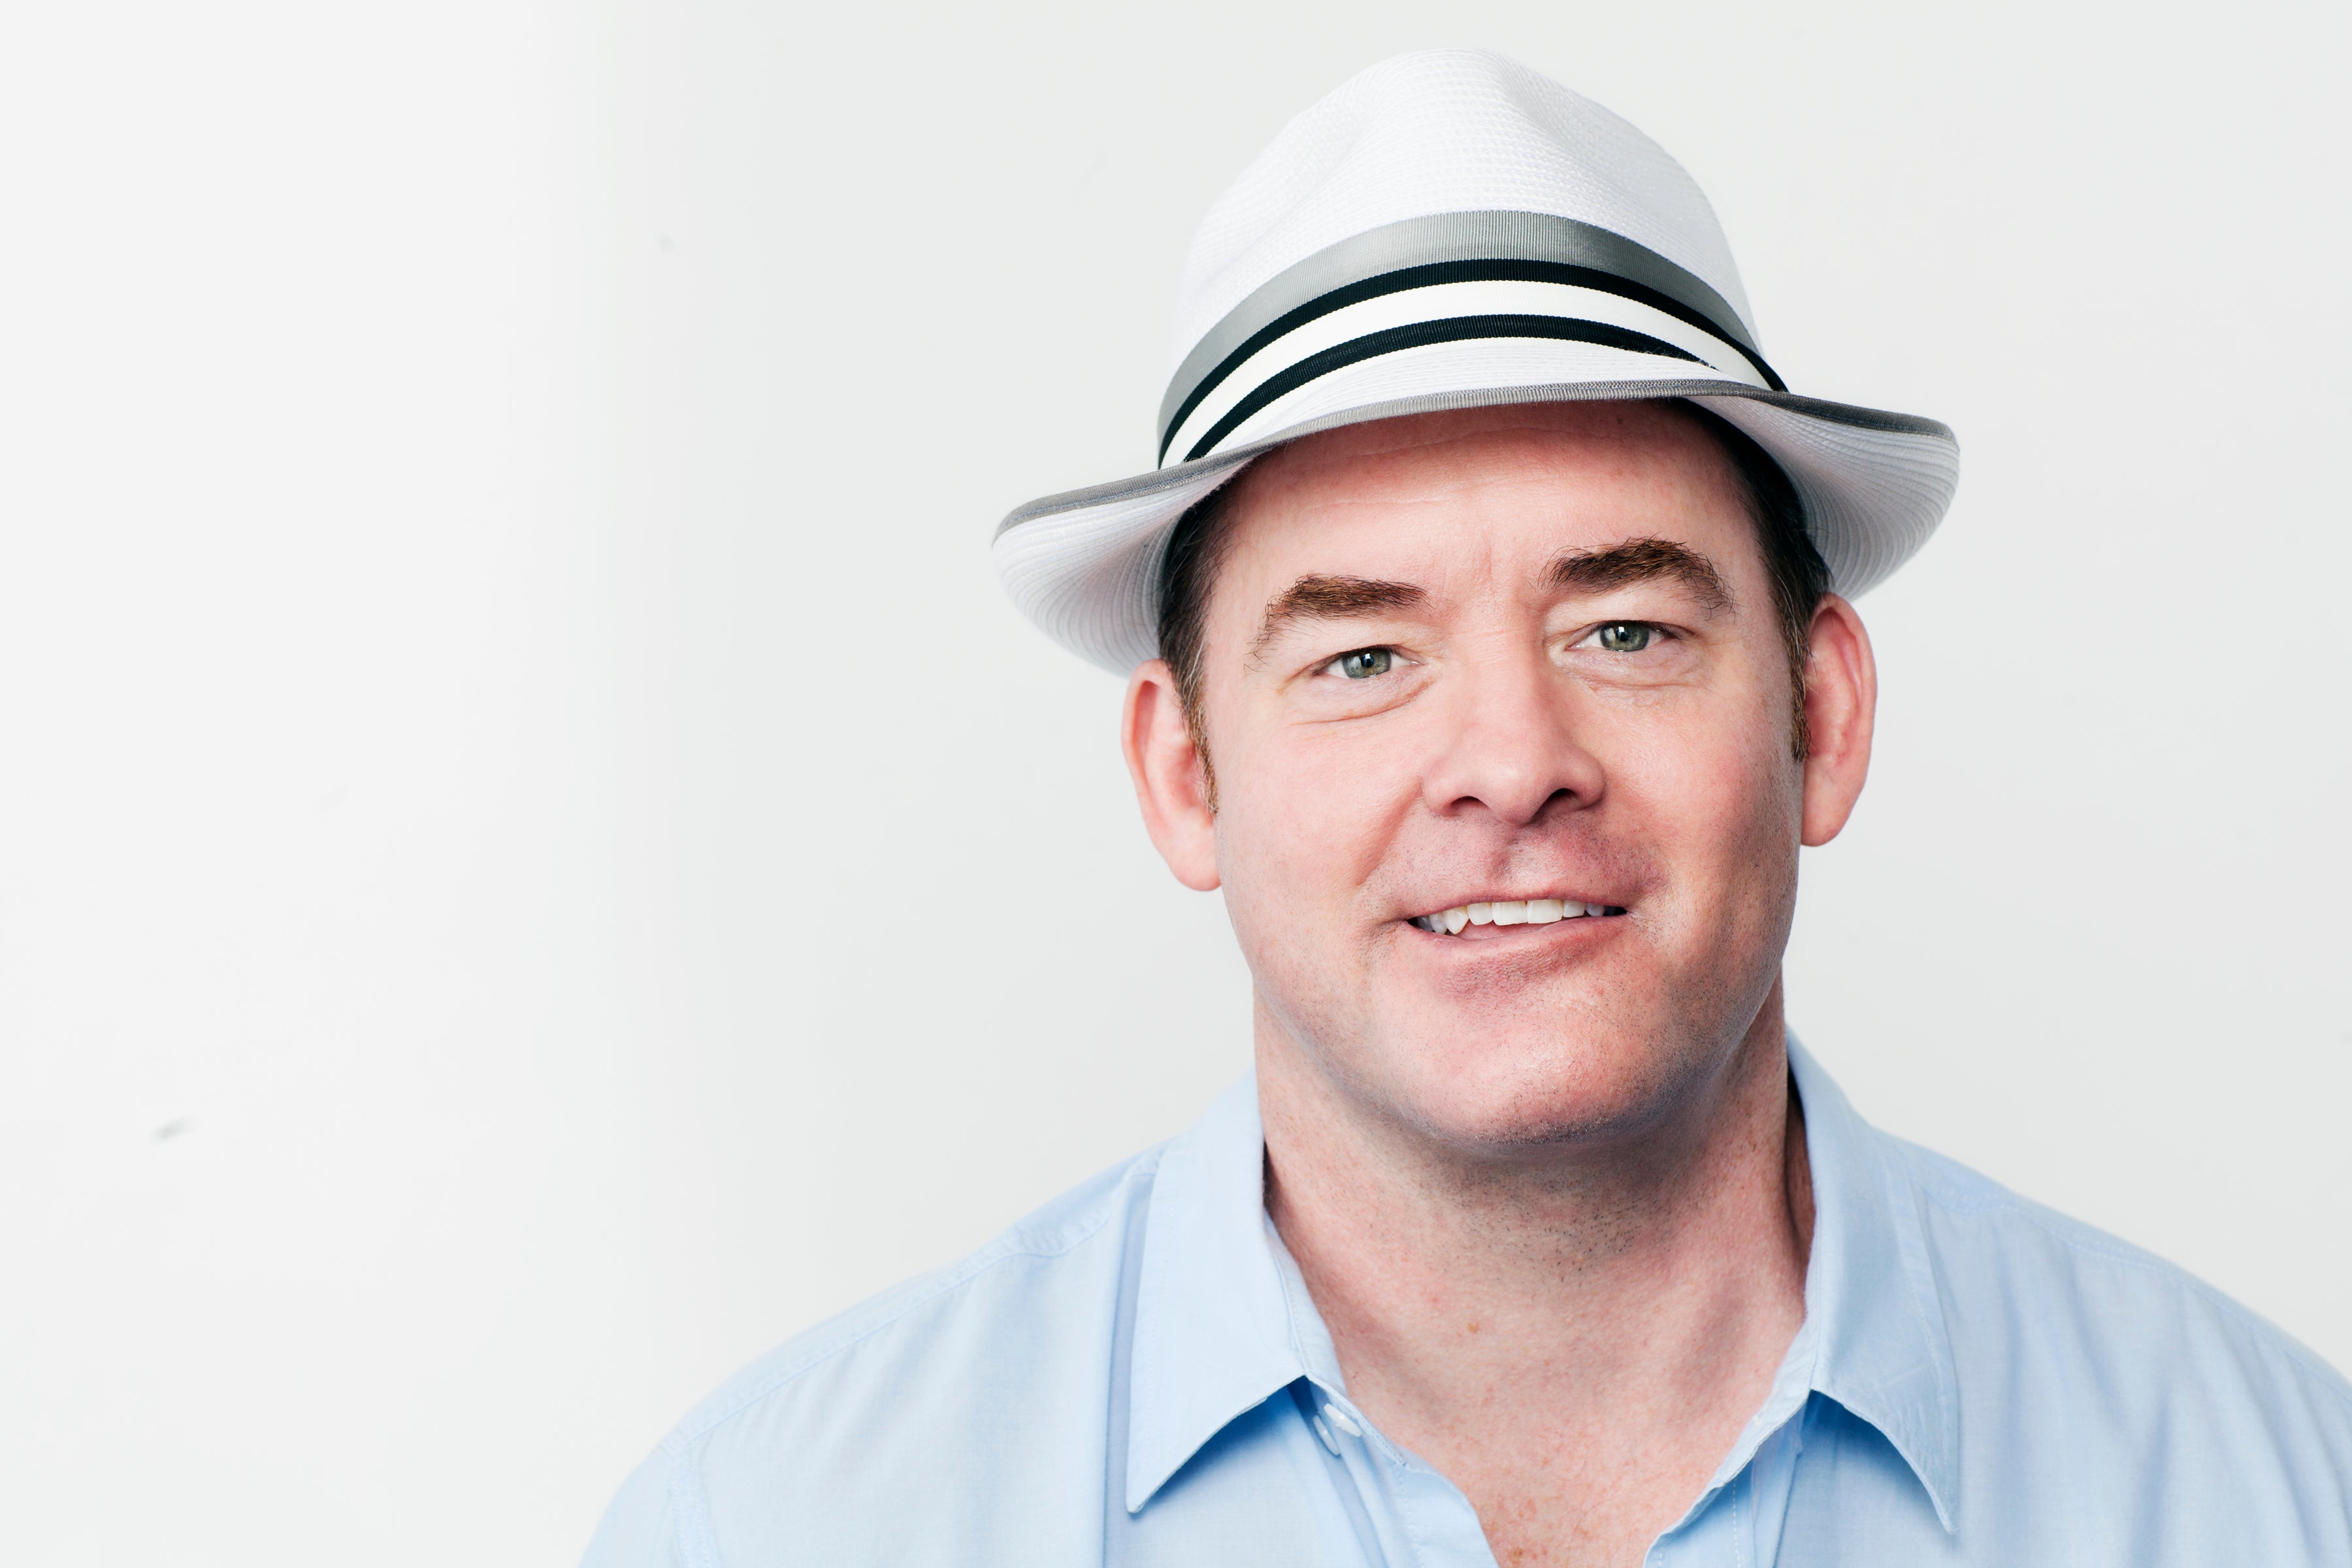 David Koechner at Laugh Out Loud Comedy Club